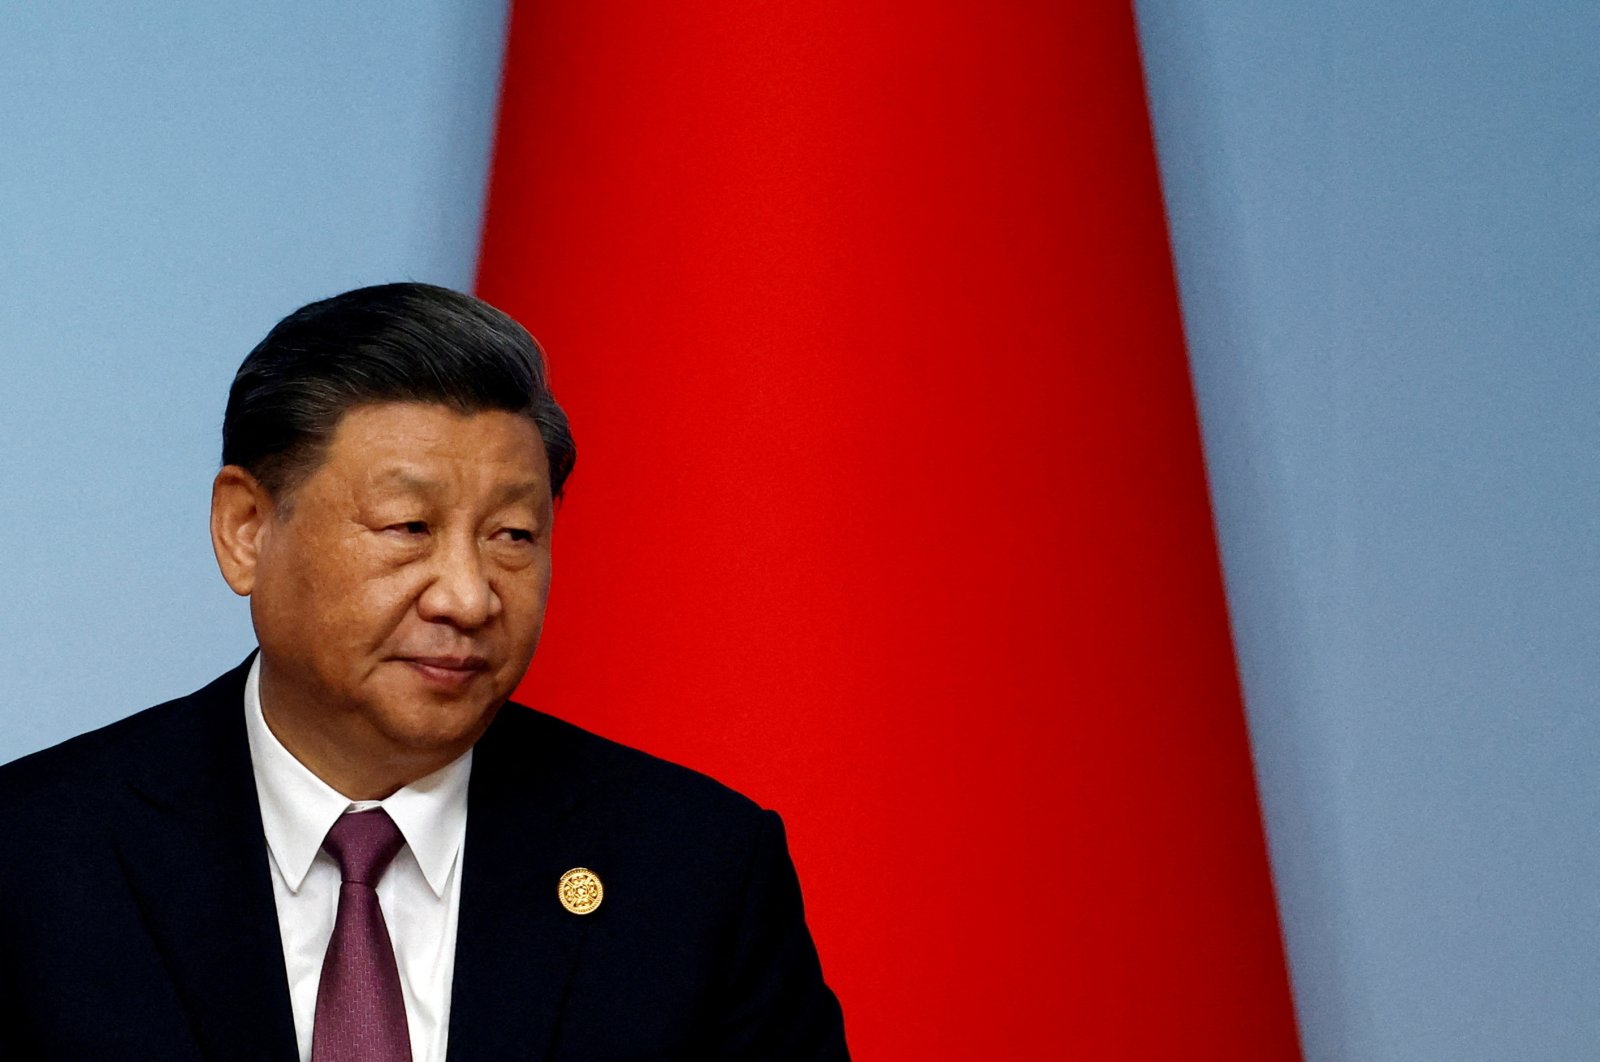 Xi Jinping set to steer China’s role at South Africa’s BRICS Summit